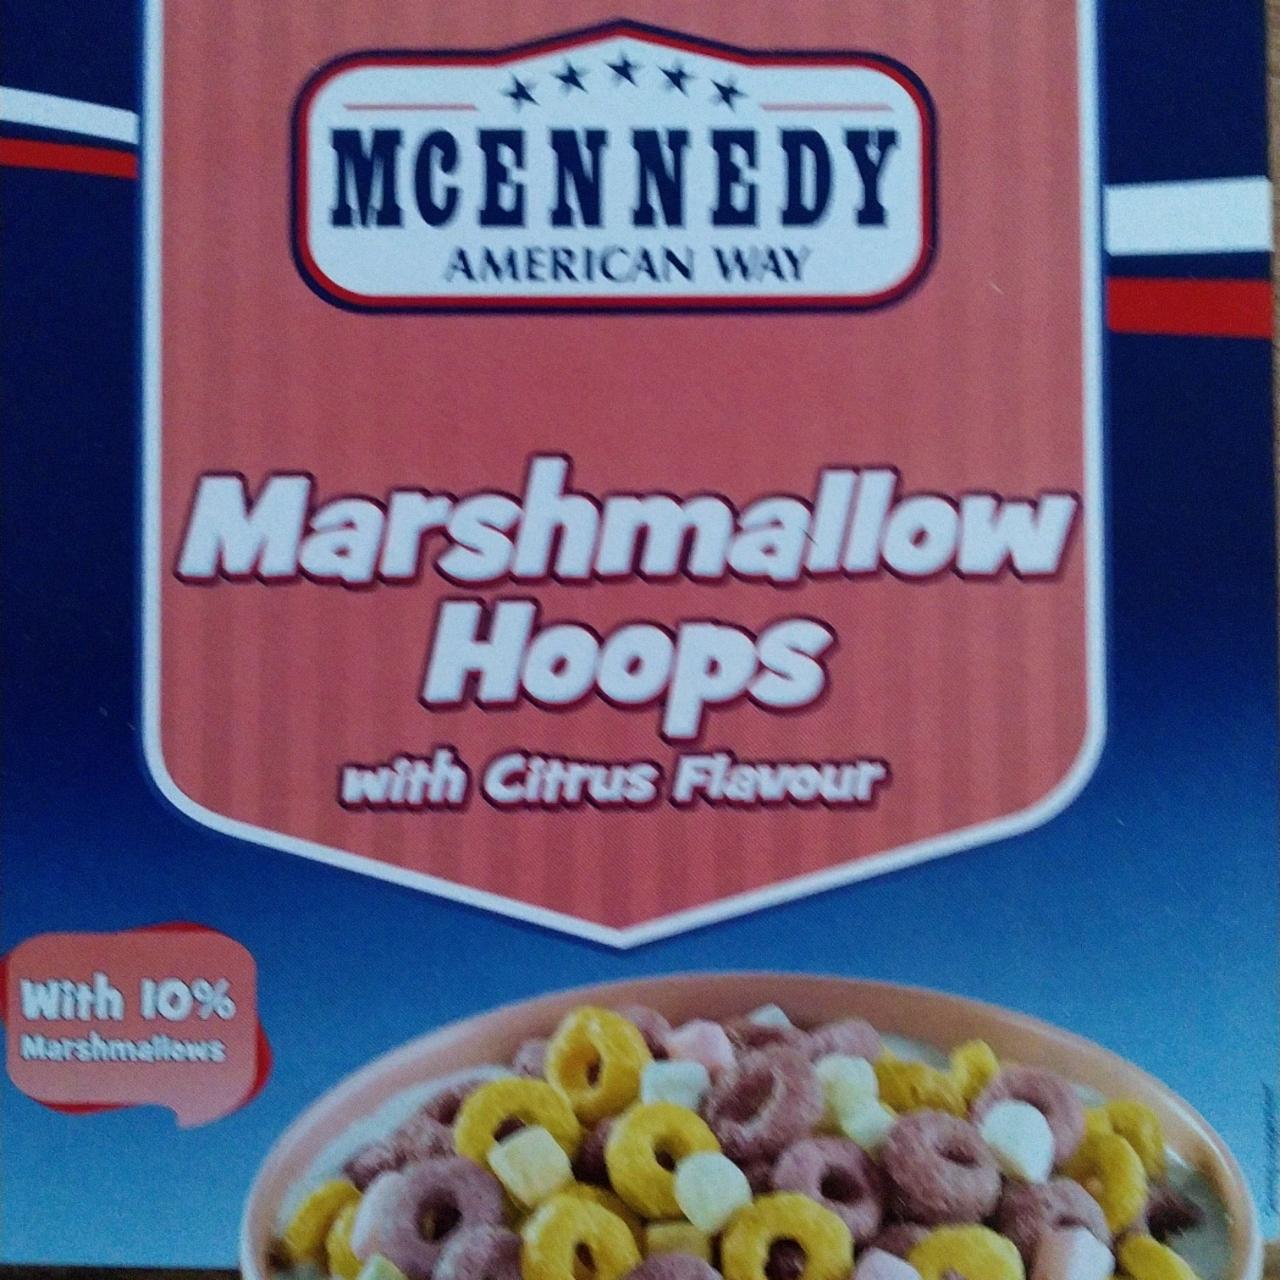 Fotografie - Marshmallow Hoops with Citrus Flavour McEnnedy American Way